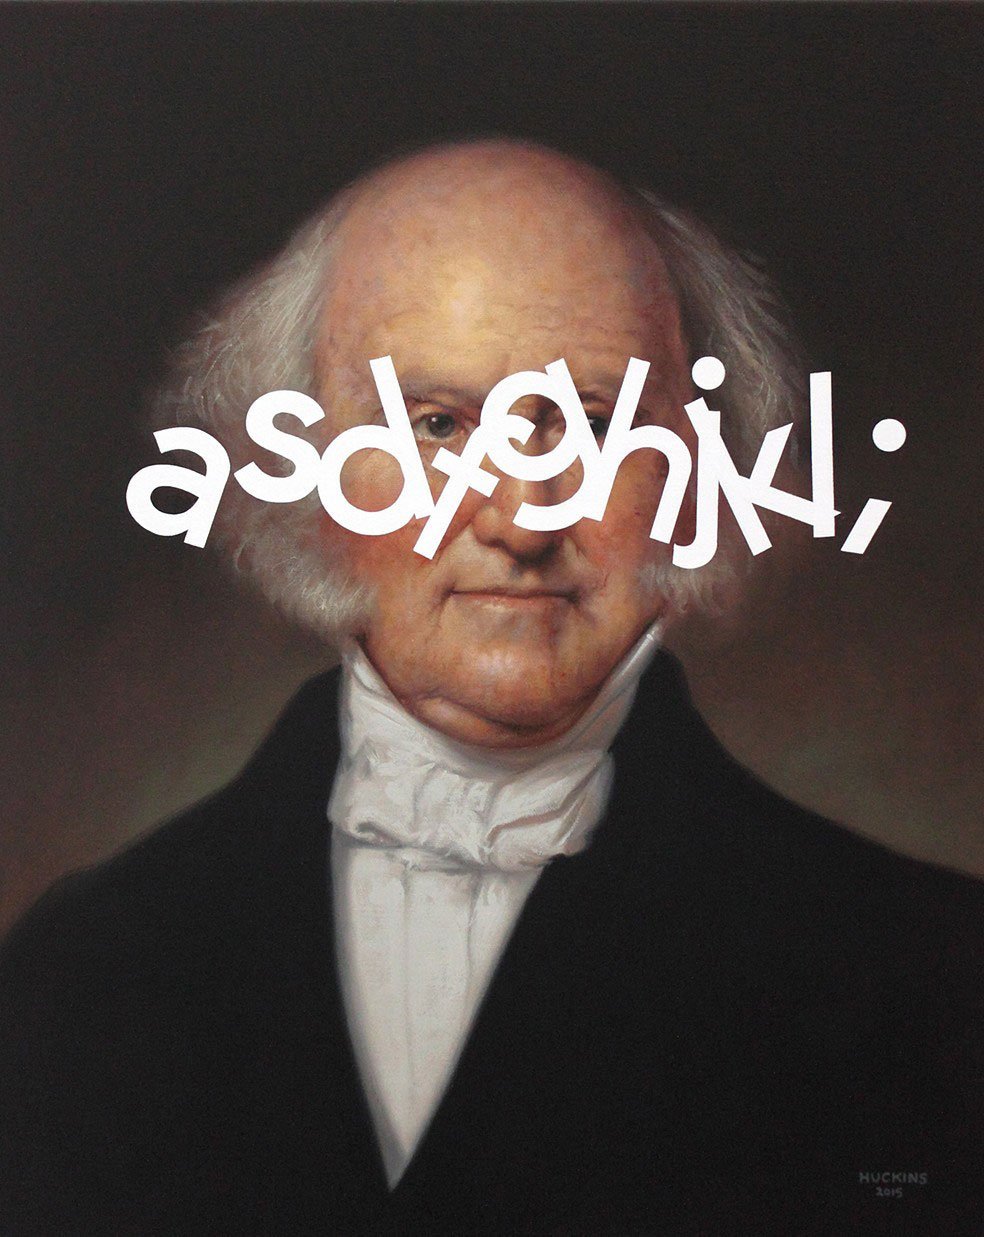 Shawn Huckins, Martin Van Buren: A Sign of Frustration or Excitement, acrylic on canvas, 20 x 16 in (51 x 41 cm), 2015. 